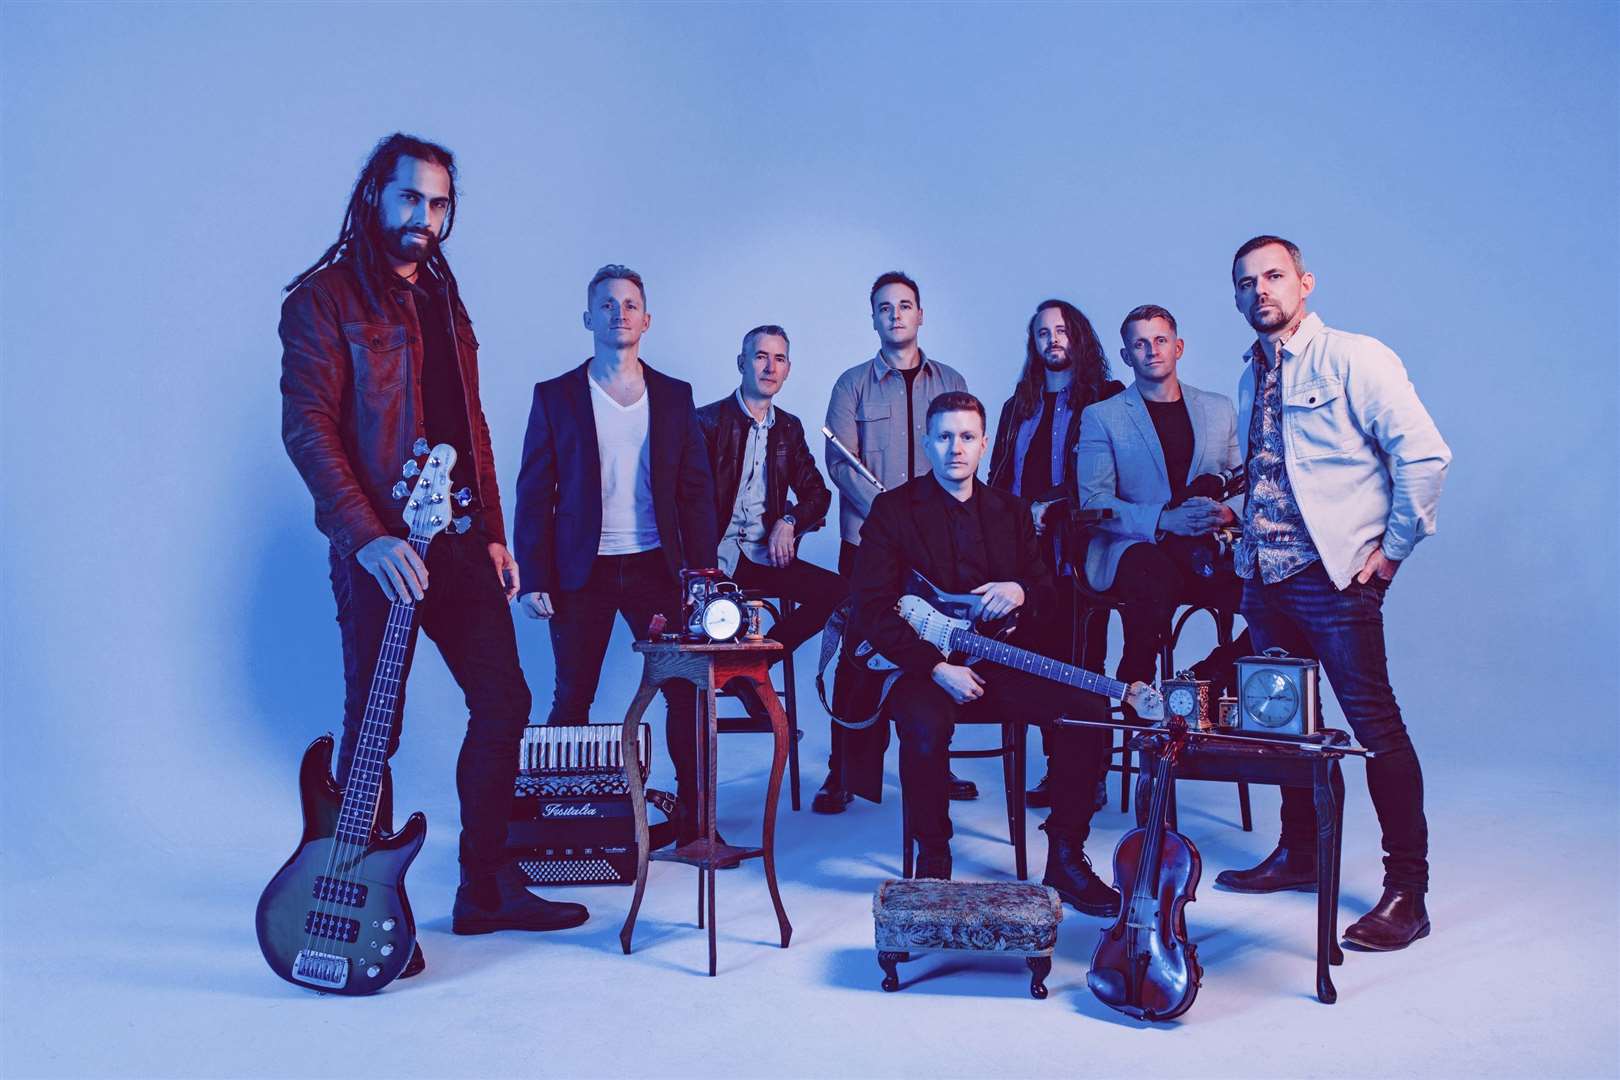 Skerryvore will headline the festival's music offering.